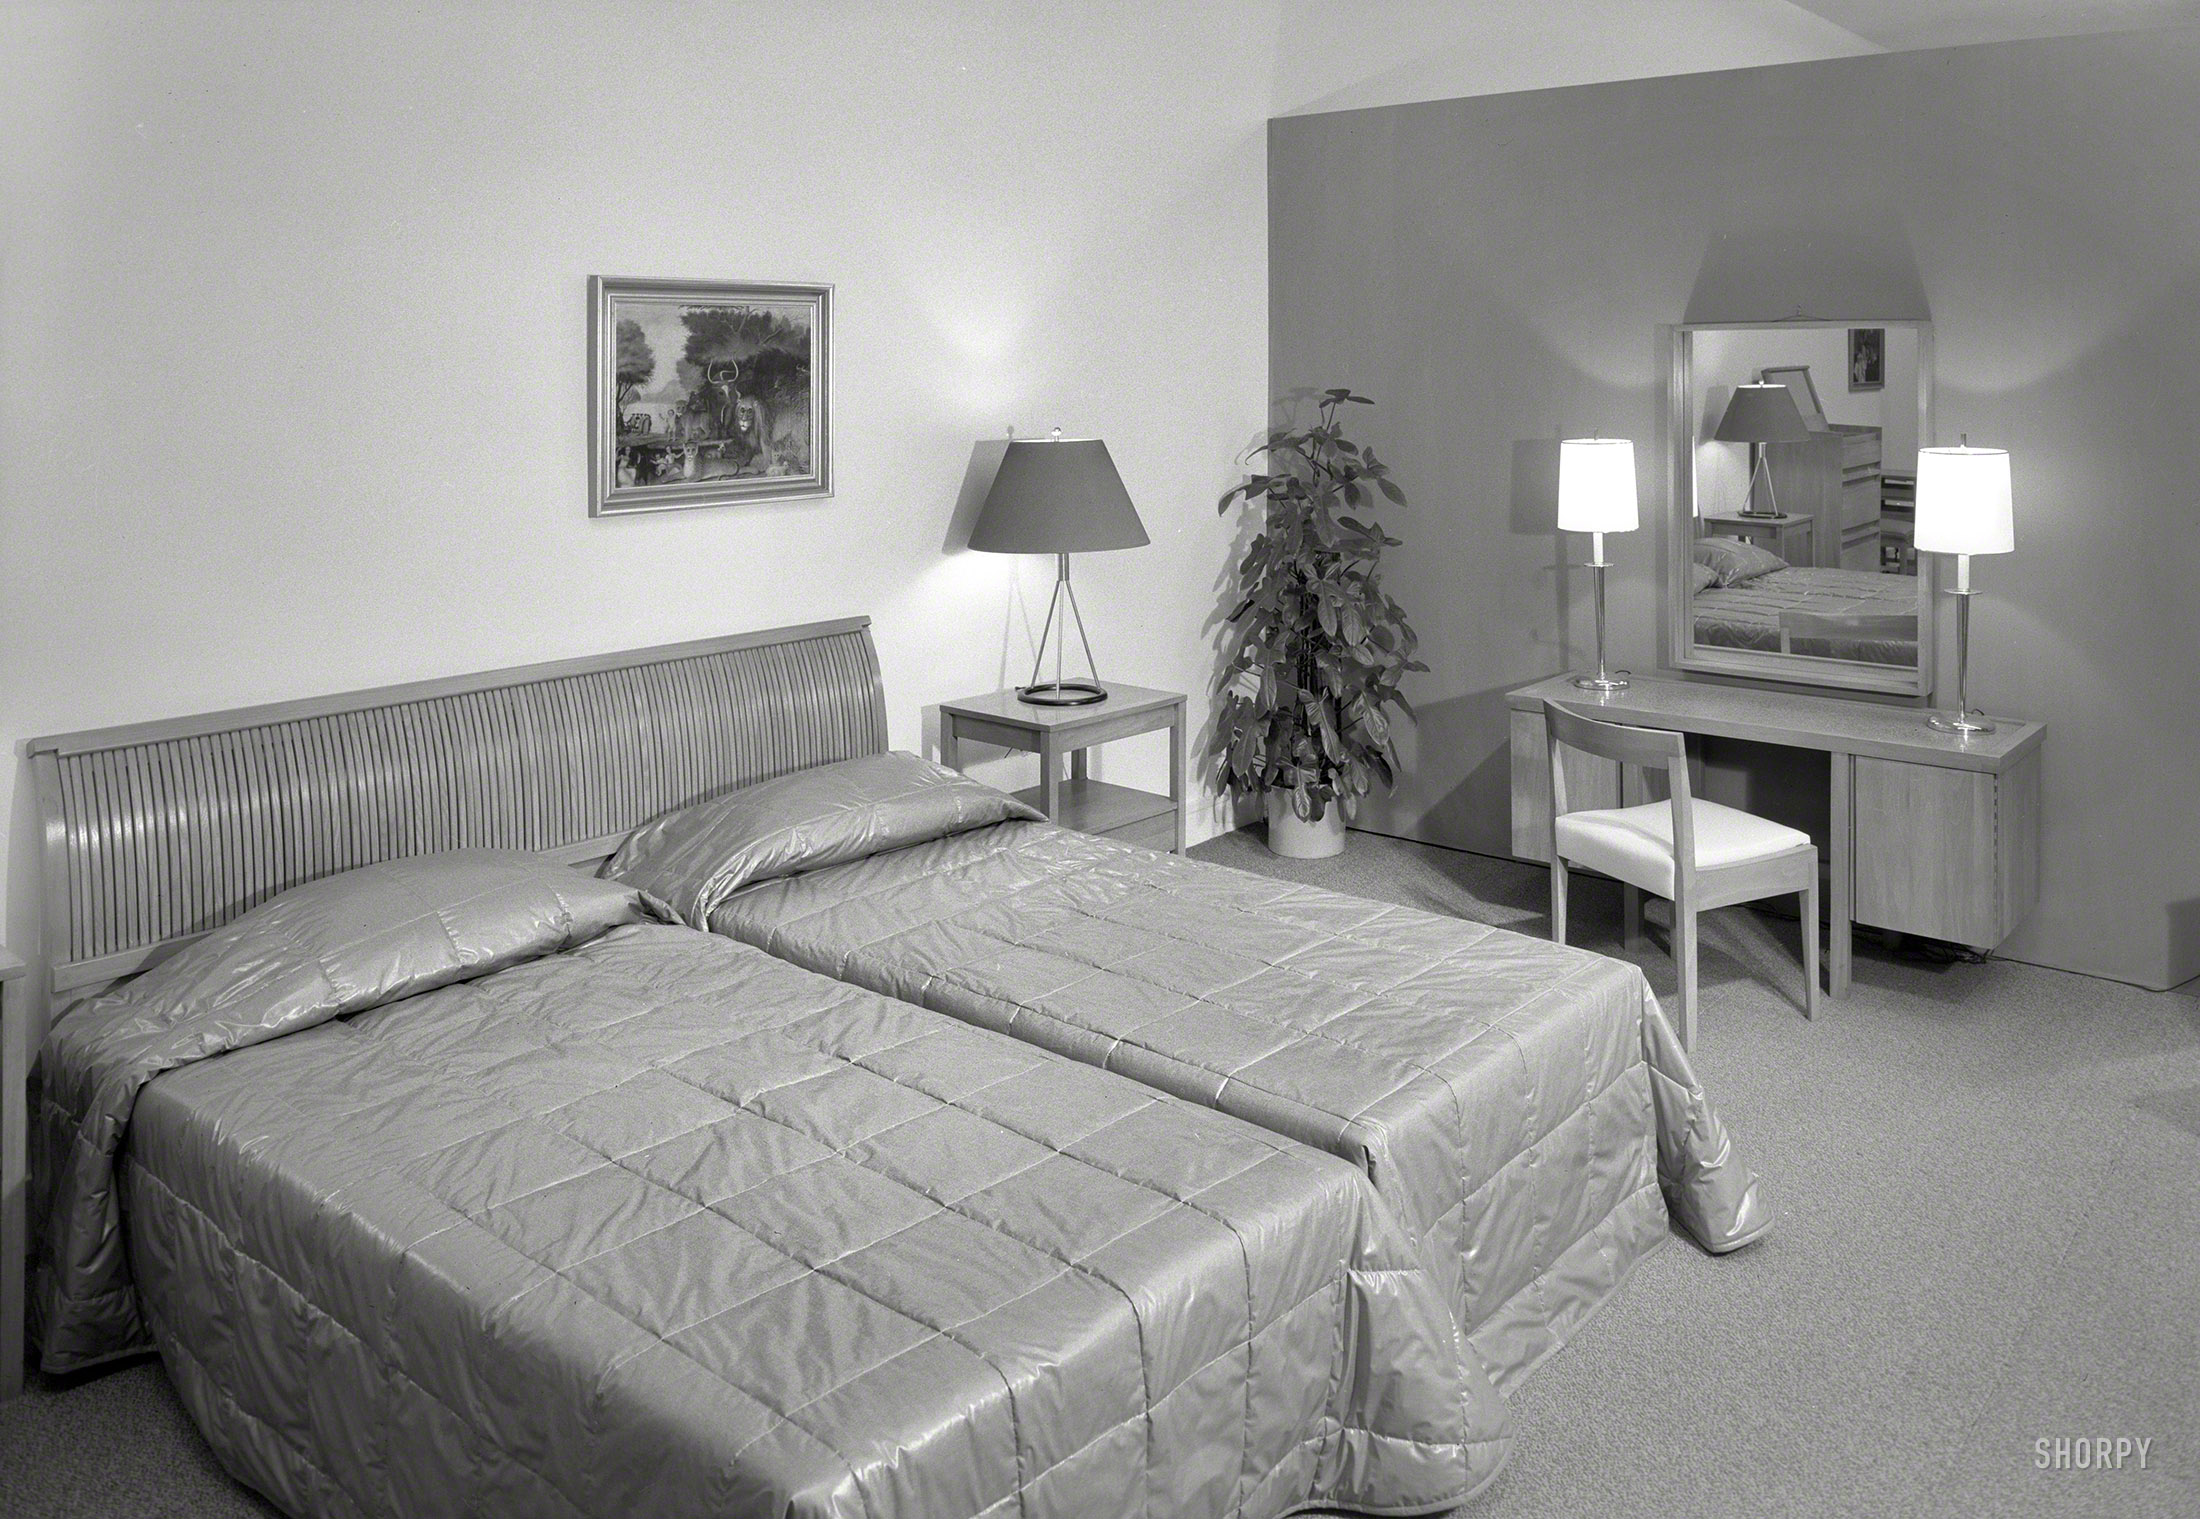 October 12, 1951. Great Neck, Long Island, N.Y. "Statton Modern at John Wanamaker. Russel Wright bedroom group. Auerbach Agency, client." Large-format acetate negative by Gottscho-Schleisner. View full size.